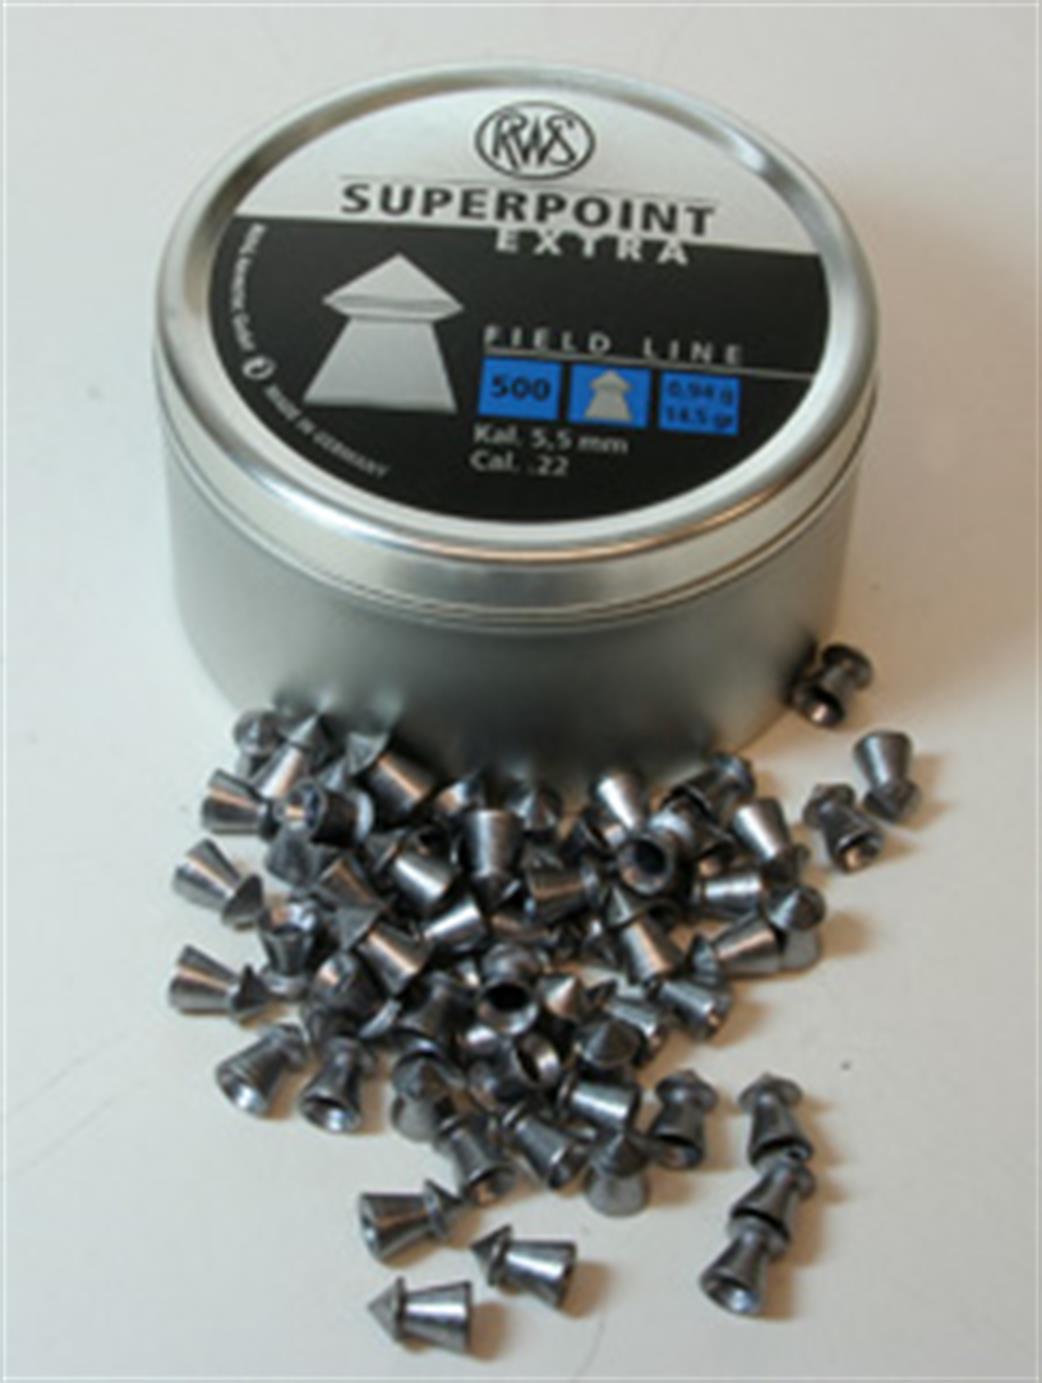 RWS  2136724 0.22 Superpoint Extra Pellets tin of 500